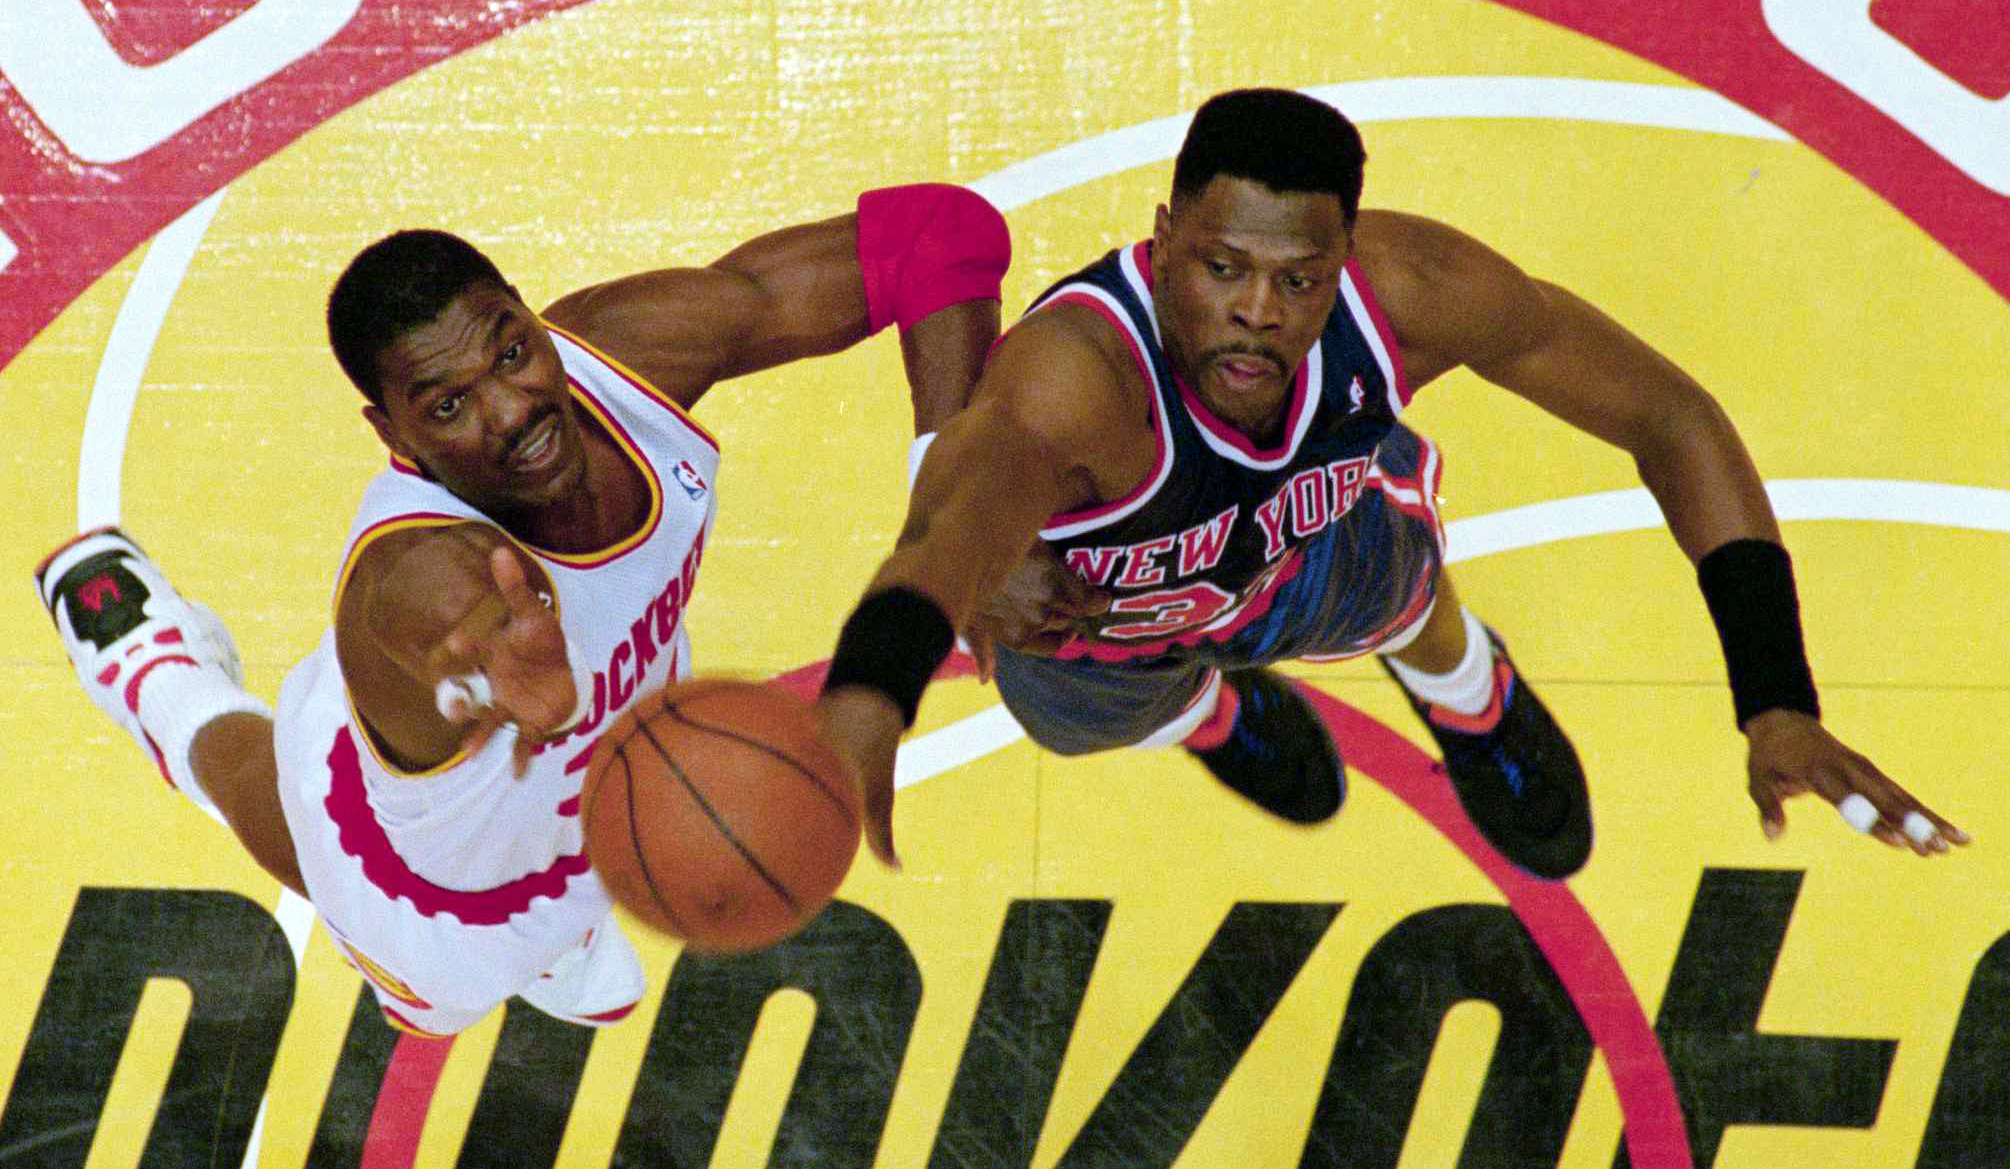 Houston Rockets center Hakeem Olajuwon and New York Knicks center Patrick Ewing face off in a jump-ball situation.